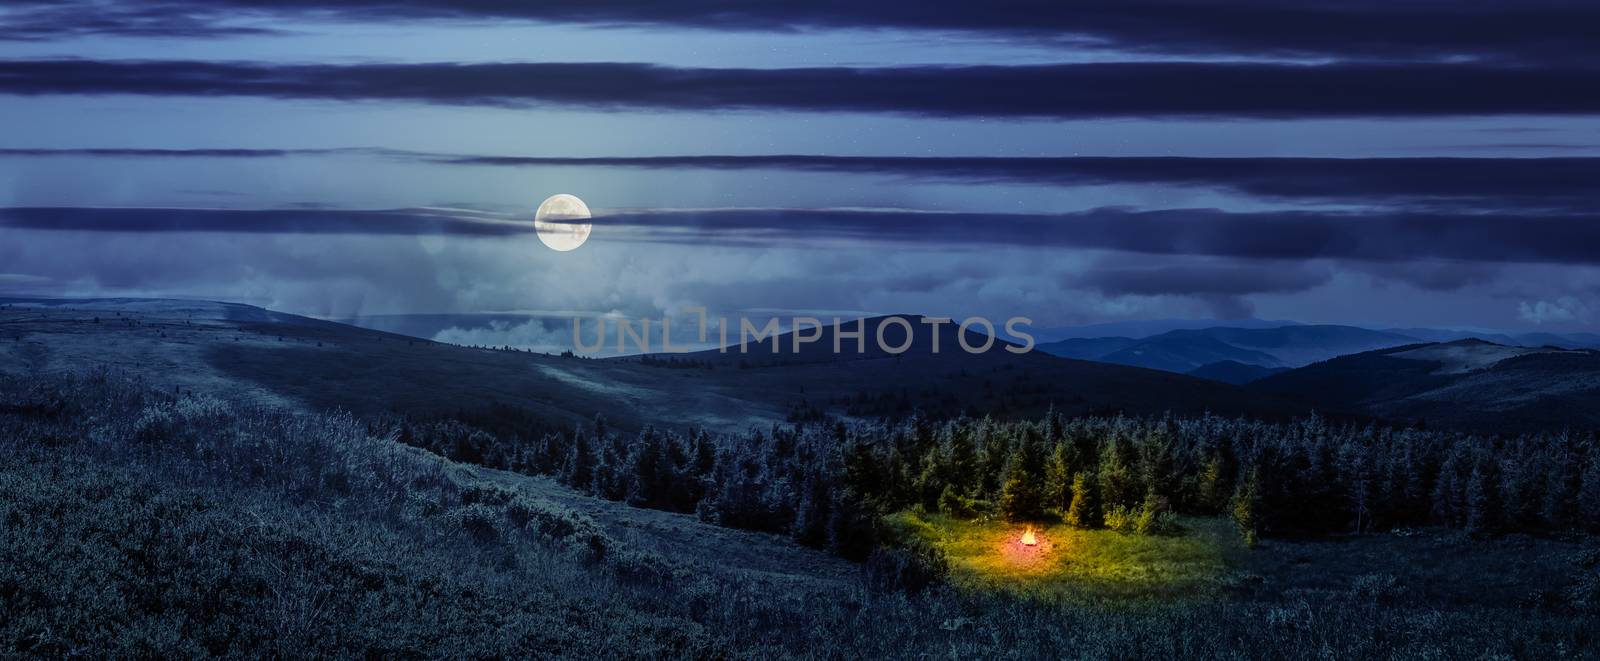 composite image of mountain range with bonfire in coniferous forest  on  hillside at night in full moon light